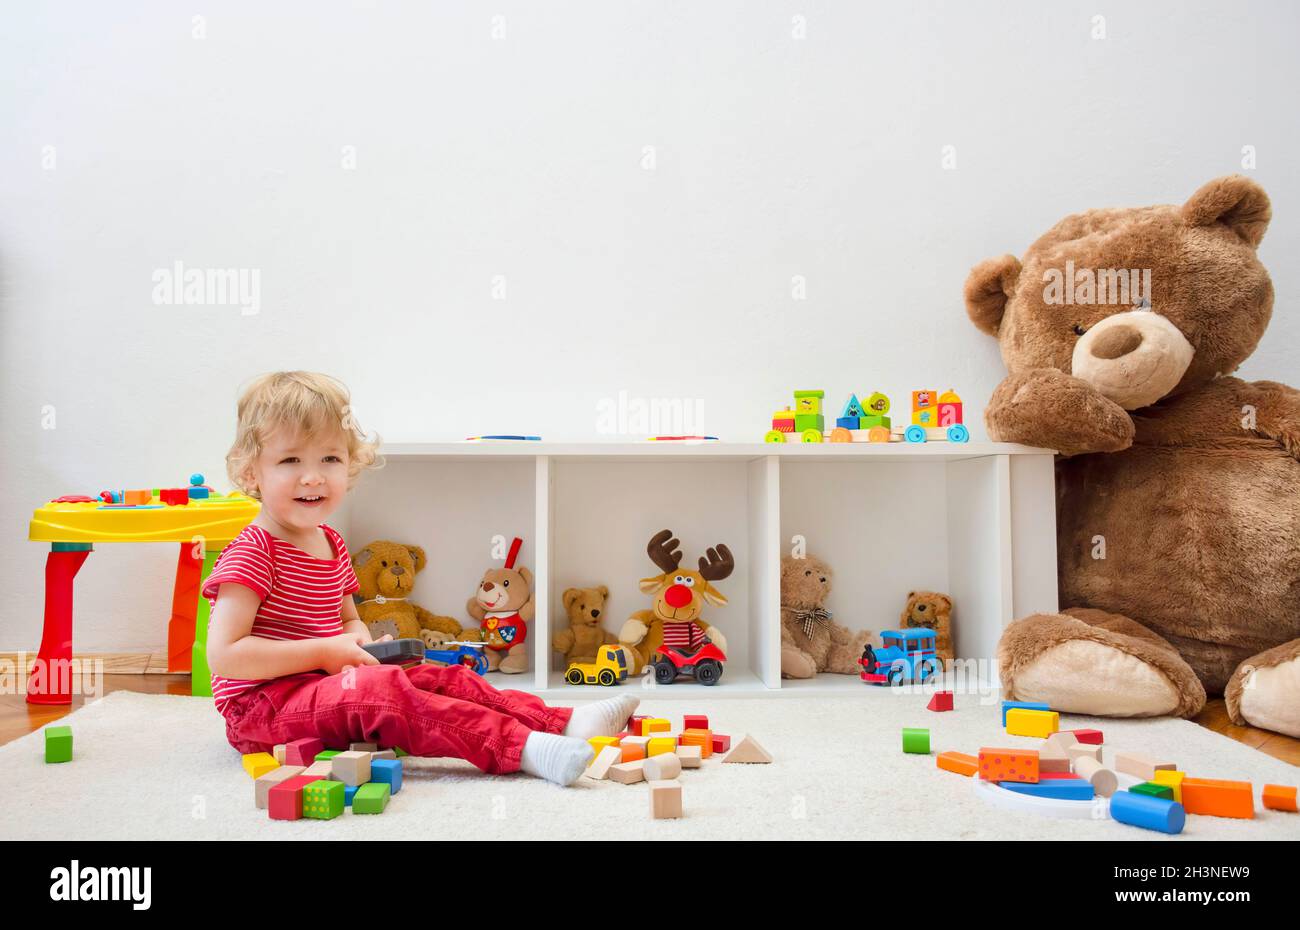 Sweet happy child boy having fun at home playing with his giant teddy bear and colorful wooden blocks and toys, on the floor. Stock Photo